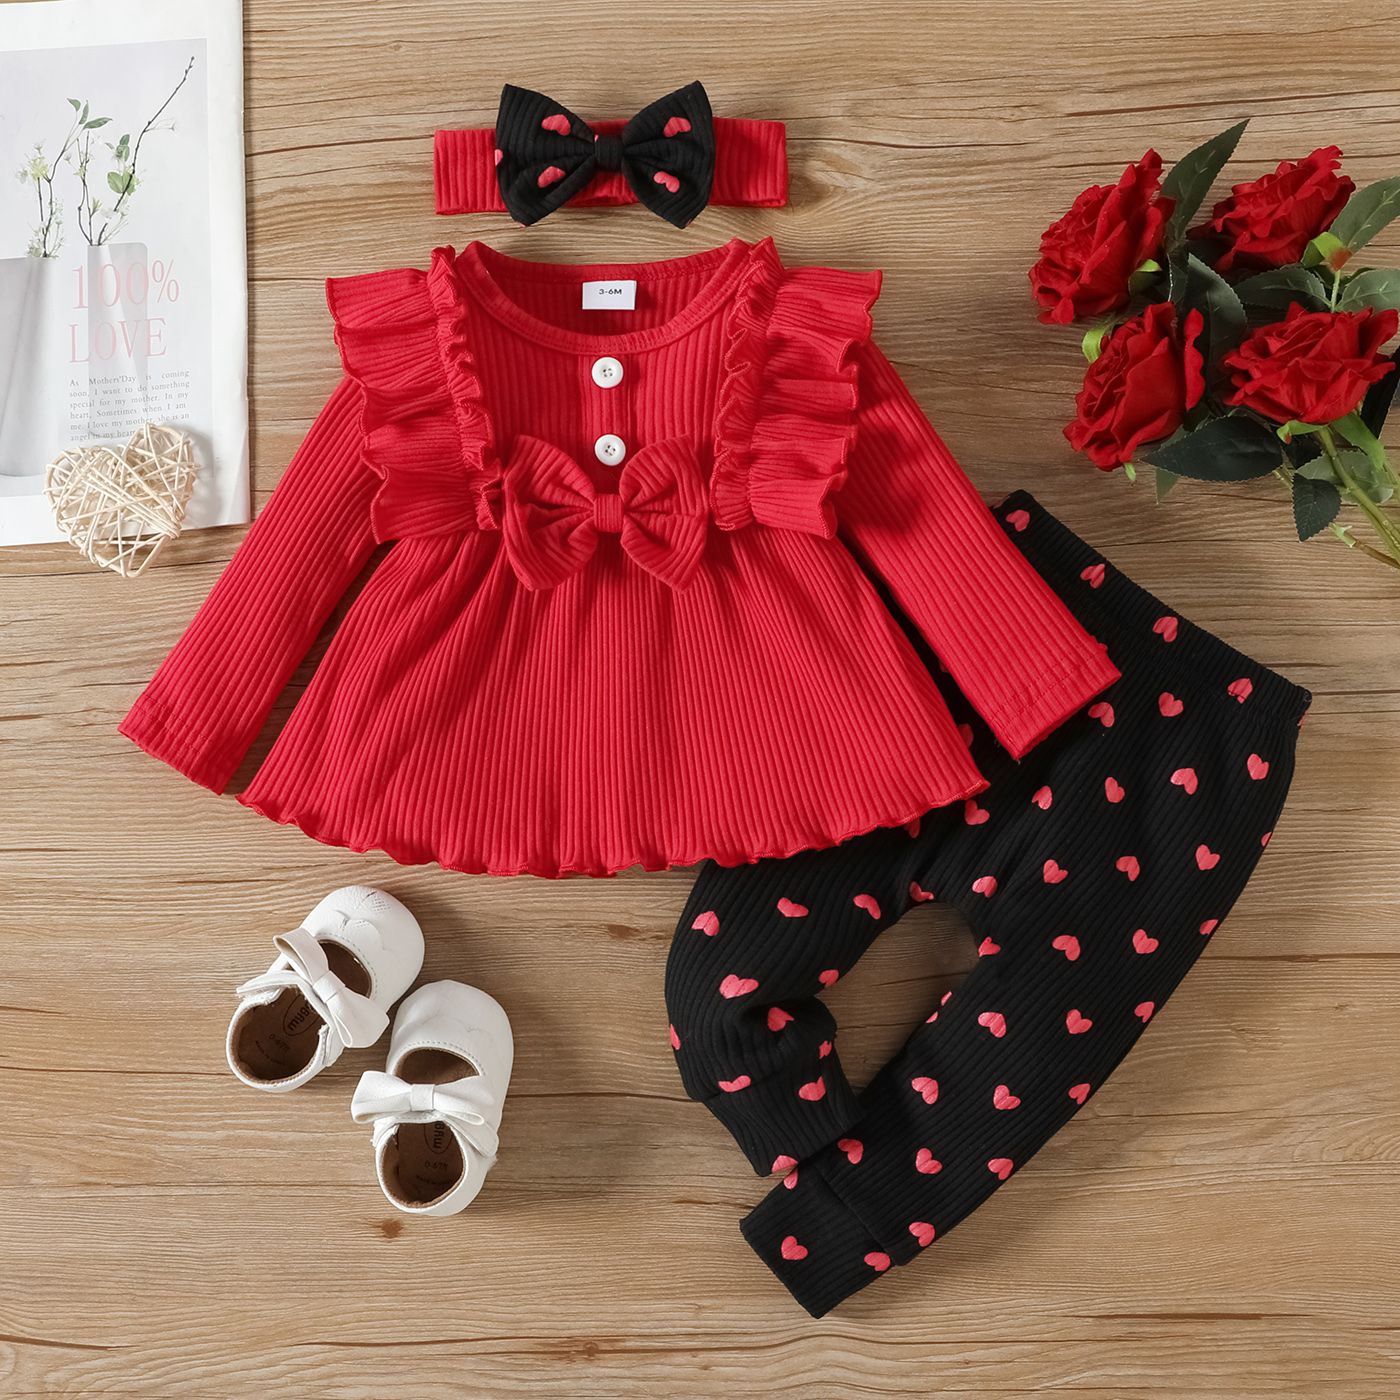 

3pcs Baby Girl 95% Cotton Rib Knit Ruffle Trim Bow Front Long-sleeve Top and Allover Heart Print Leggings with Headband Set